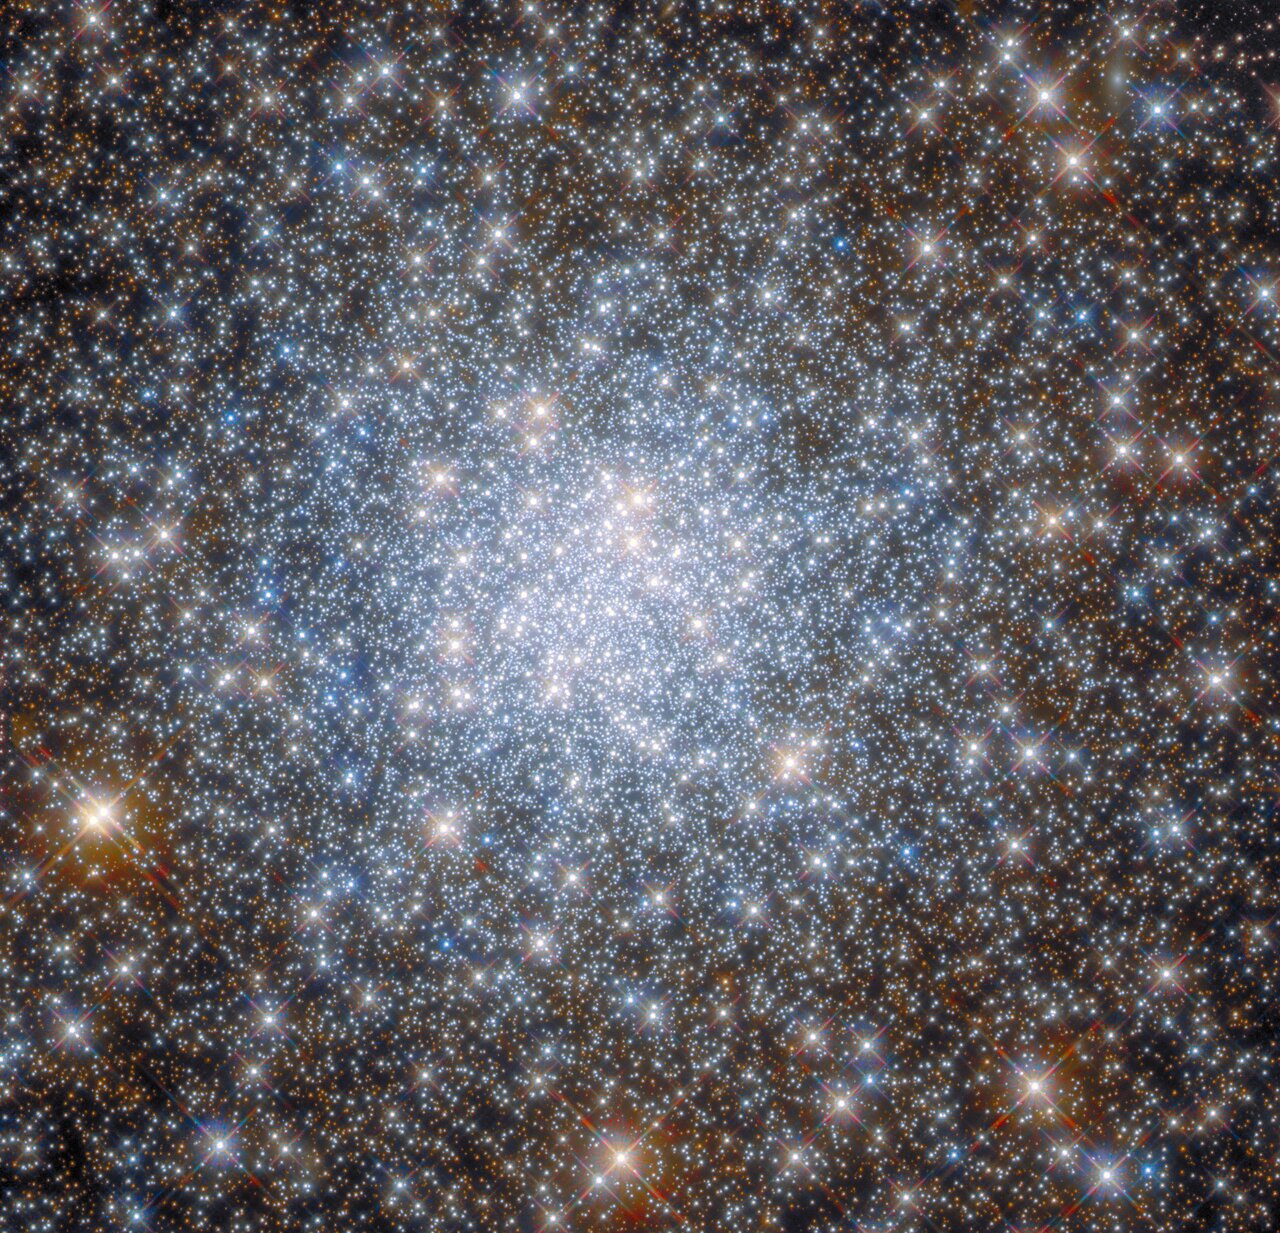 Thousands of stars sparkle in this week’s Hubble image